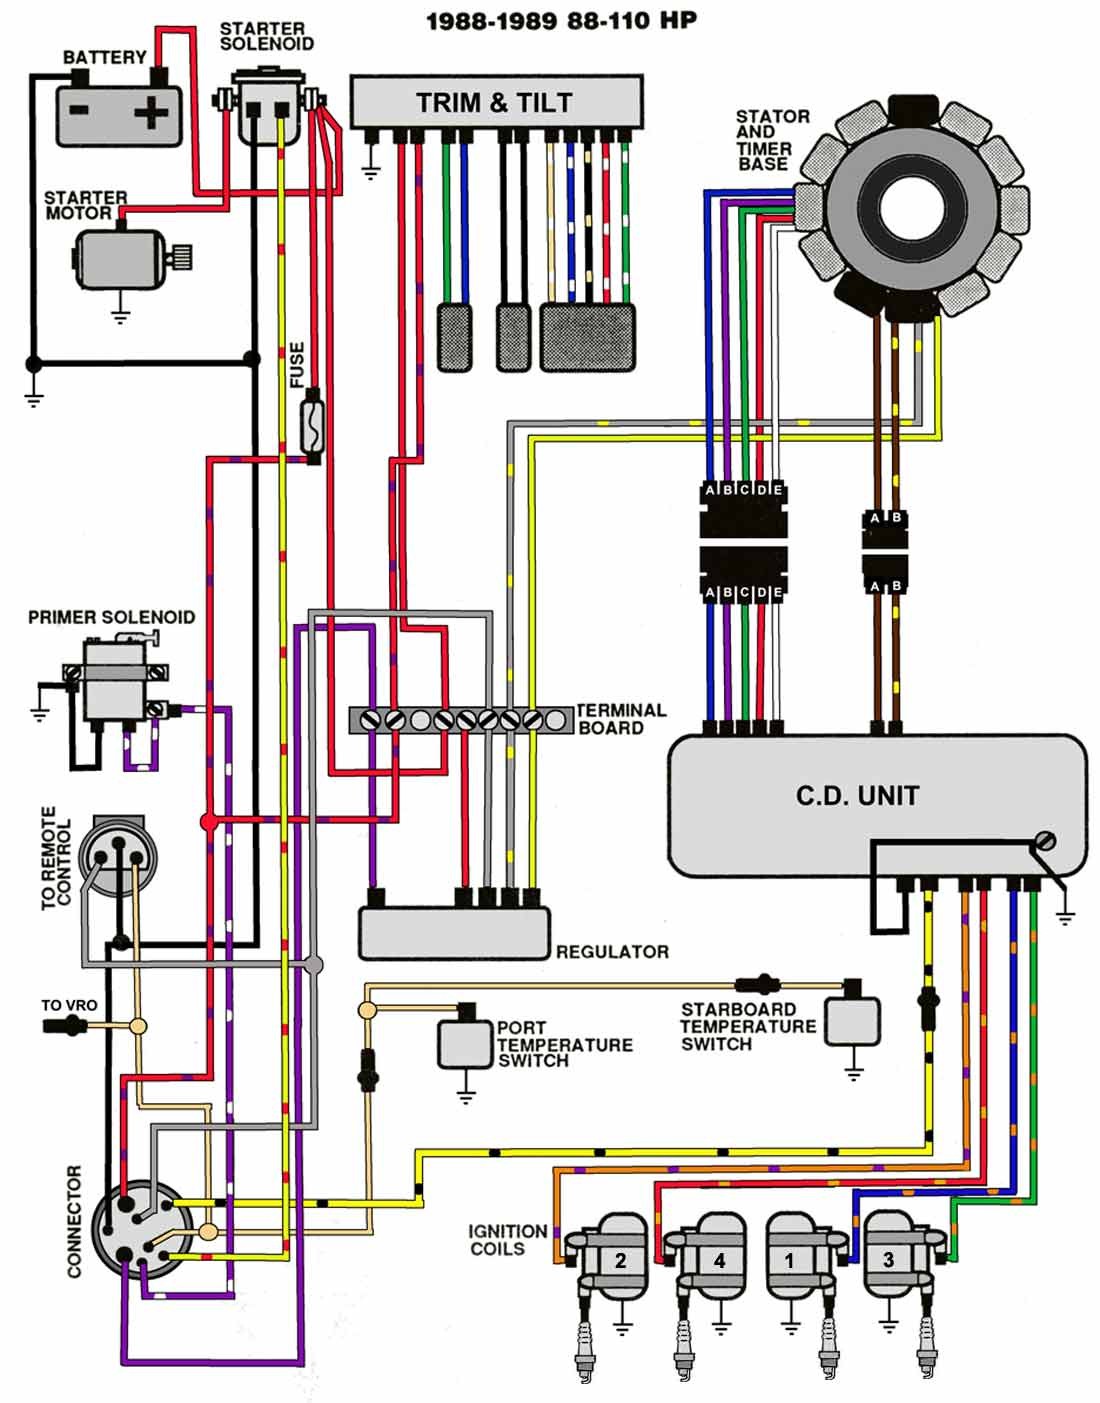 Tilt and Trim Switch Wiring Diagram Tilt and Trim Switch Wiring Diagram Great Johnson Power